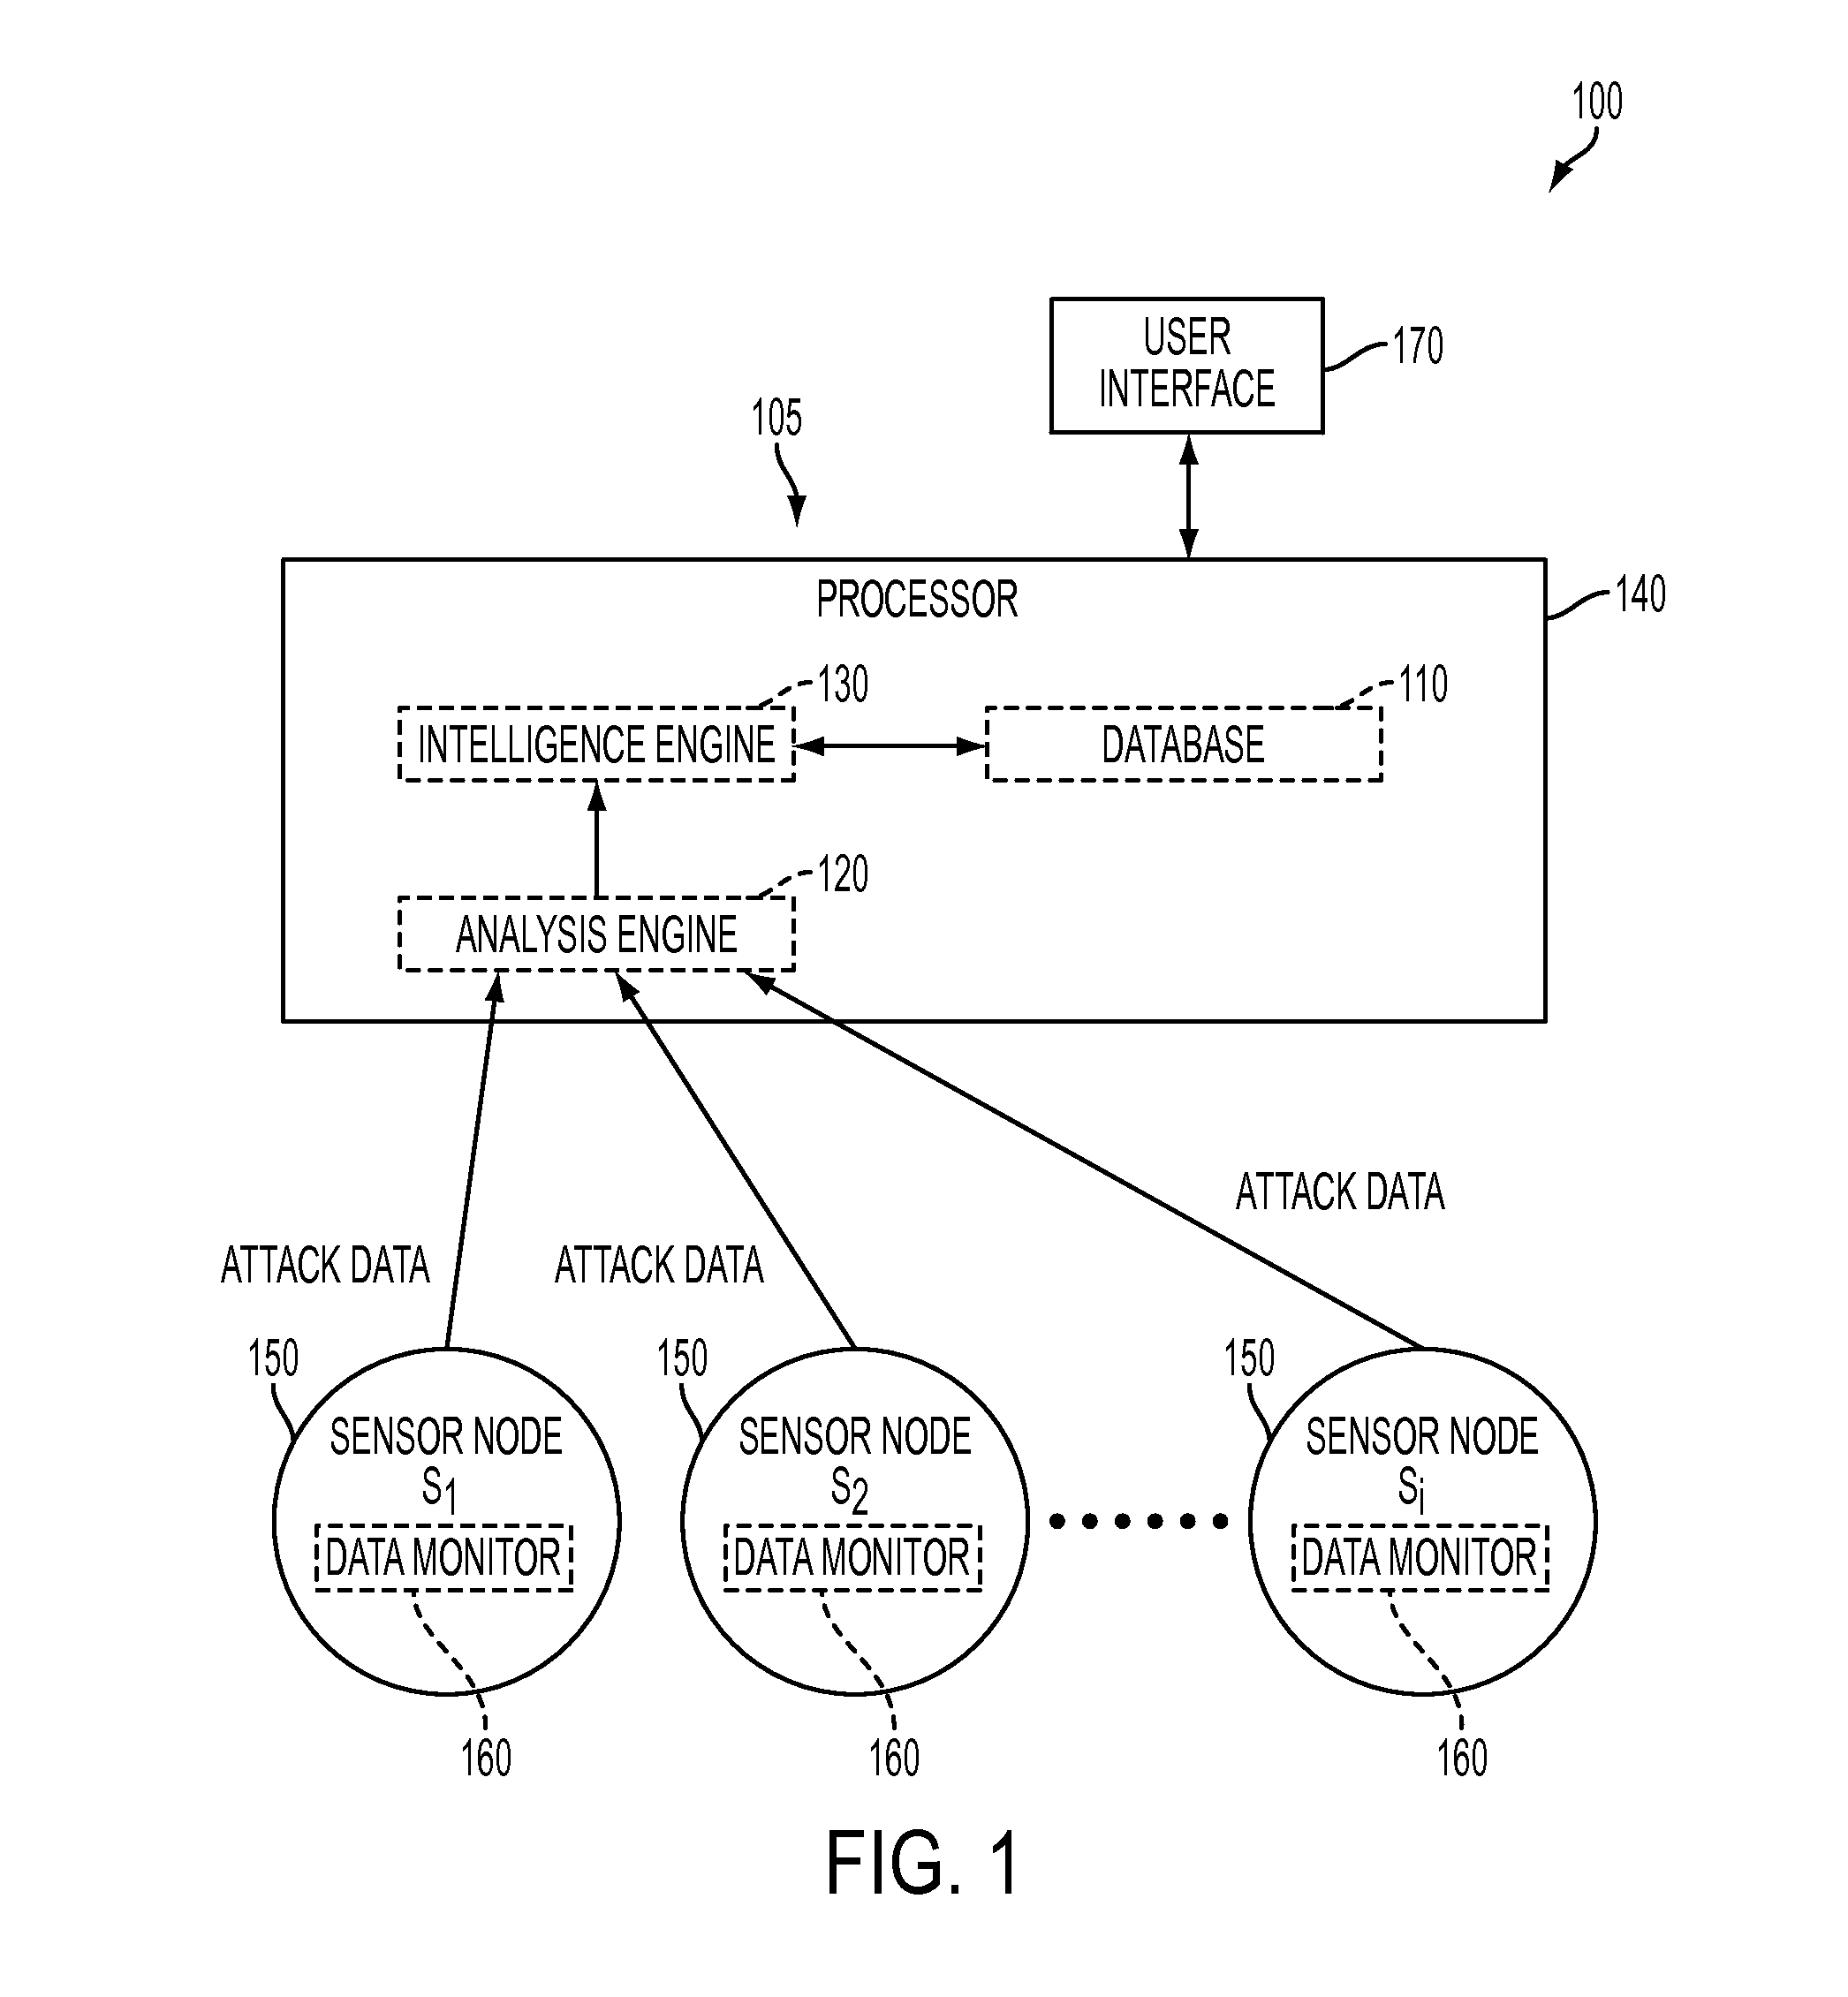 System and method for forensic cyber adversary profiling, attribution and attack identification